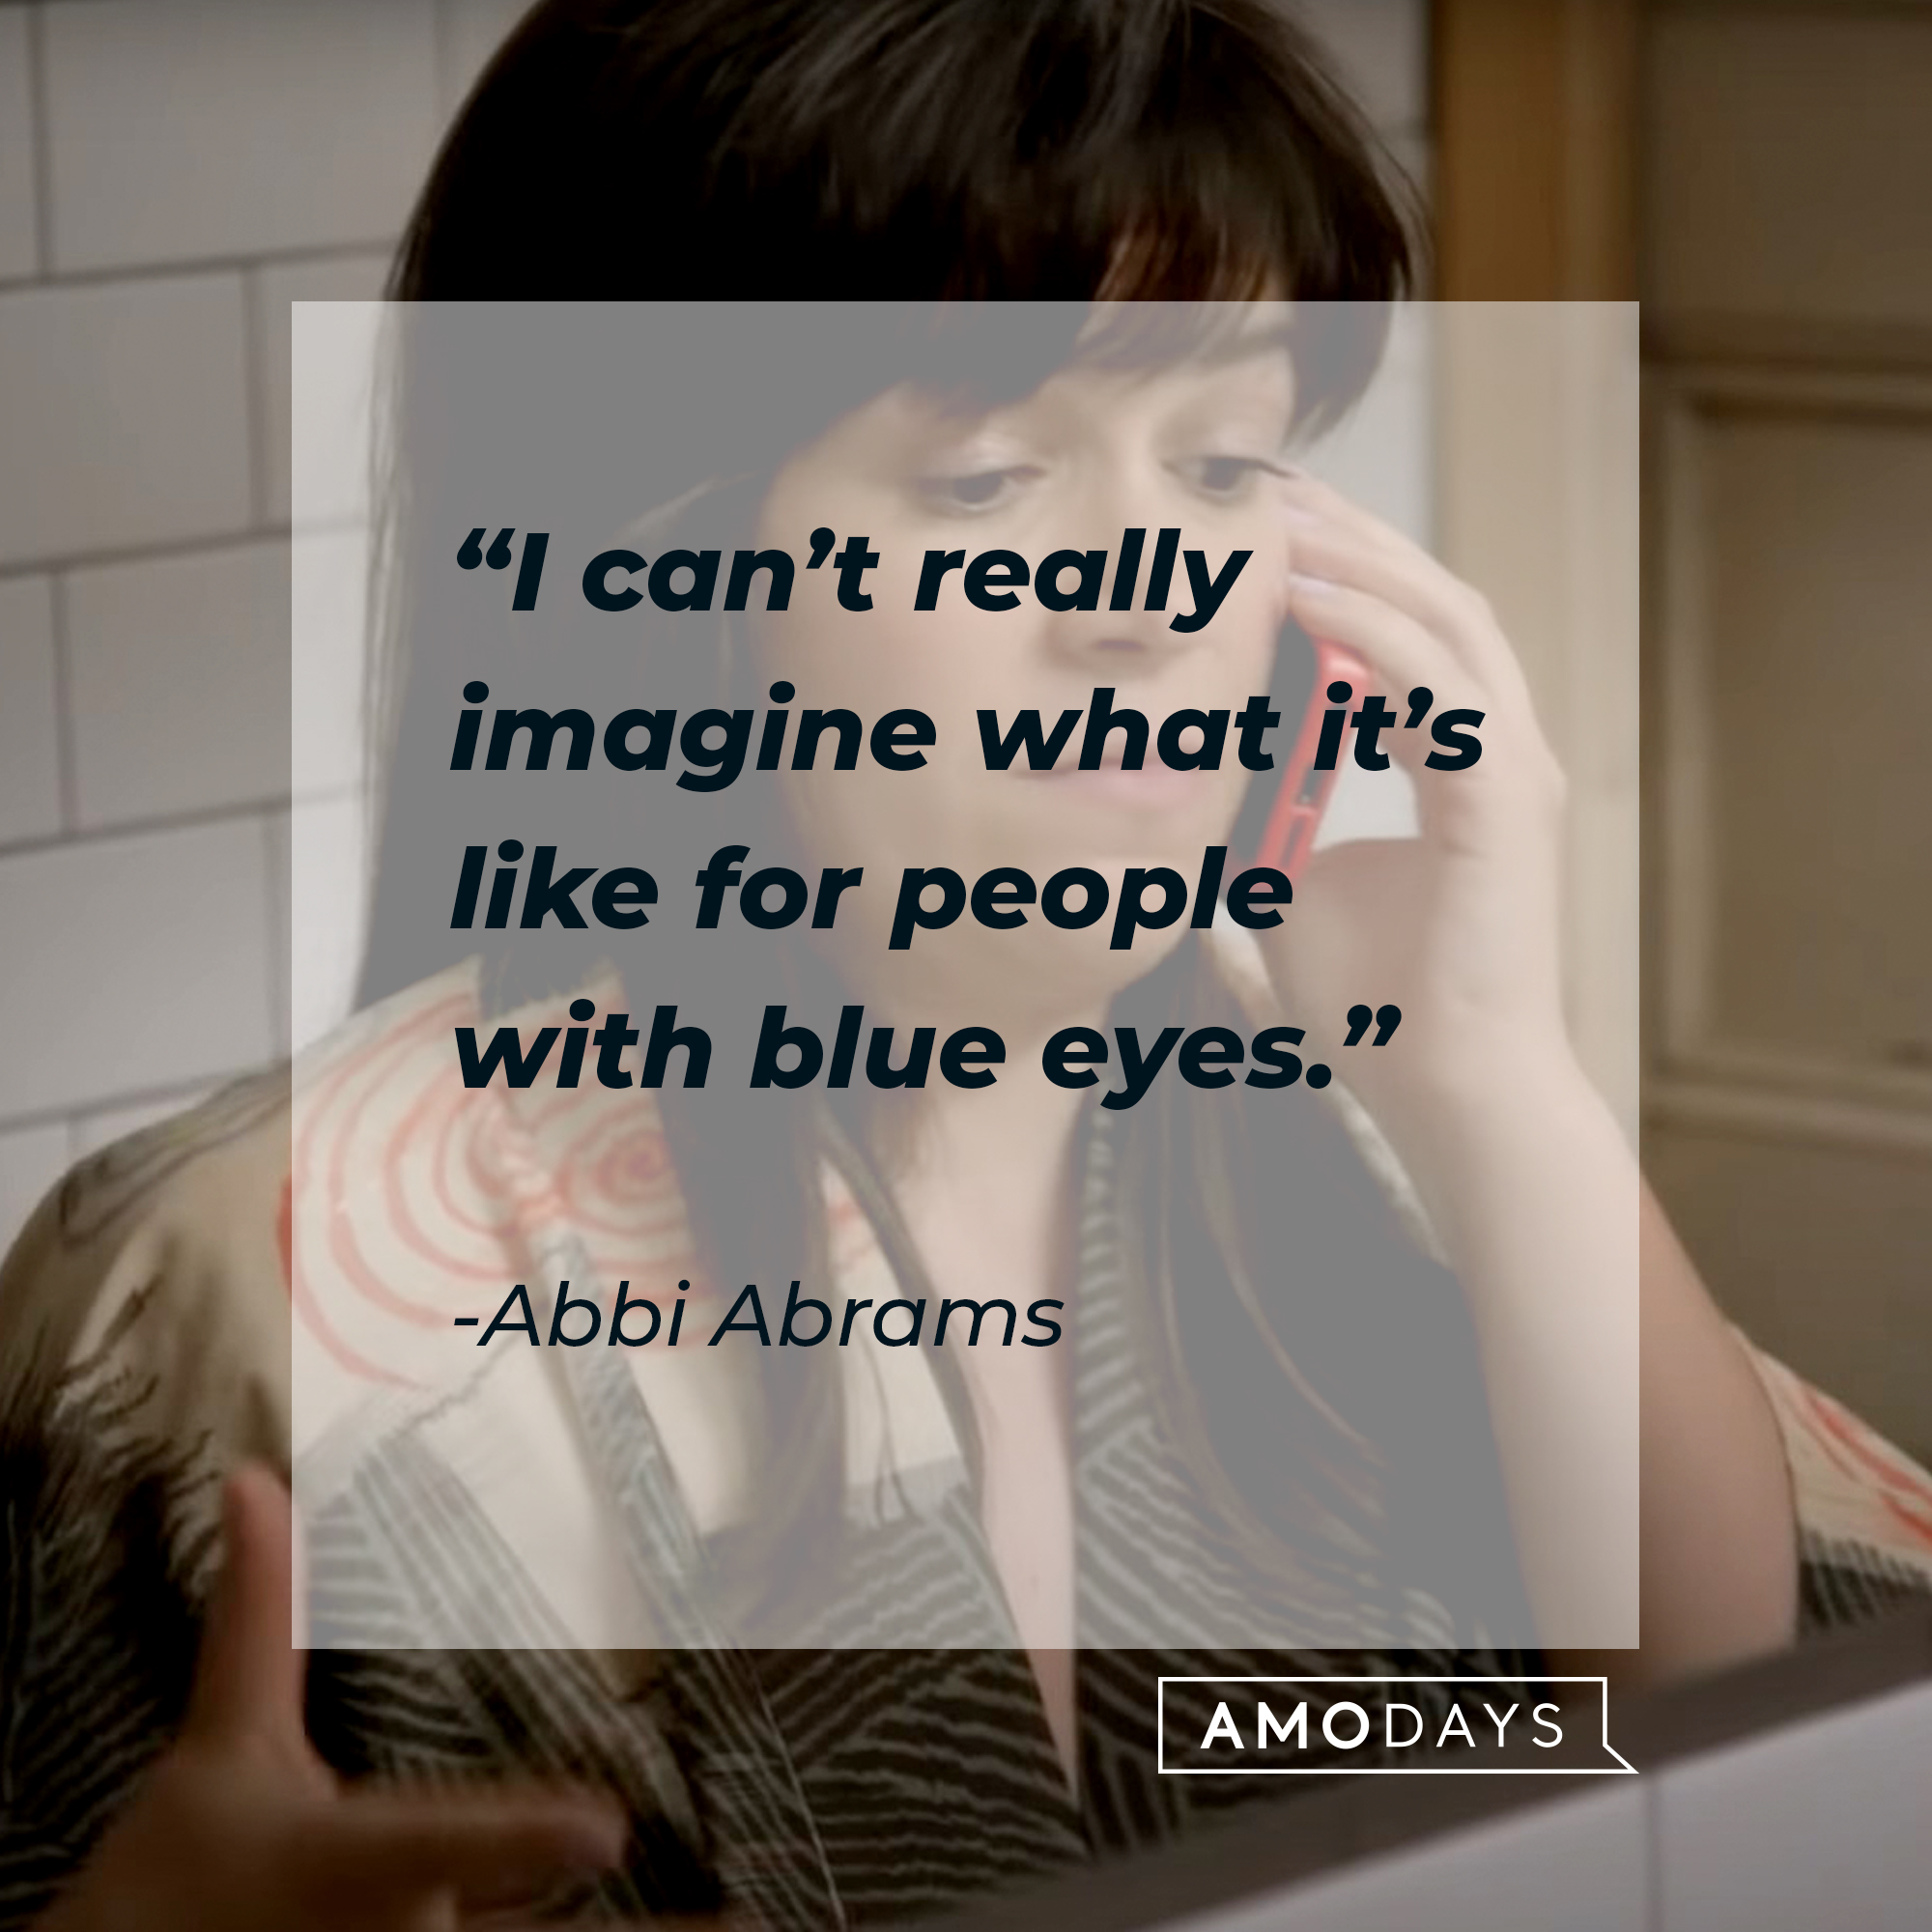 An image of Abbi Abrams with her quote: “I can’t really imagine what it’s like for people with blue eyes.”  | Source: youtube.com/ComedyCentral